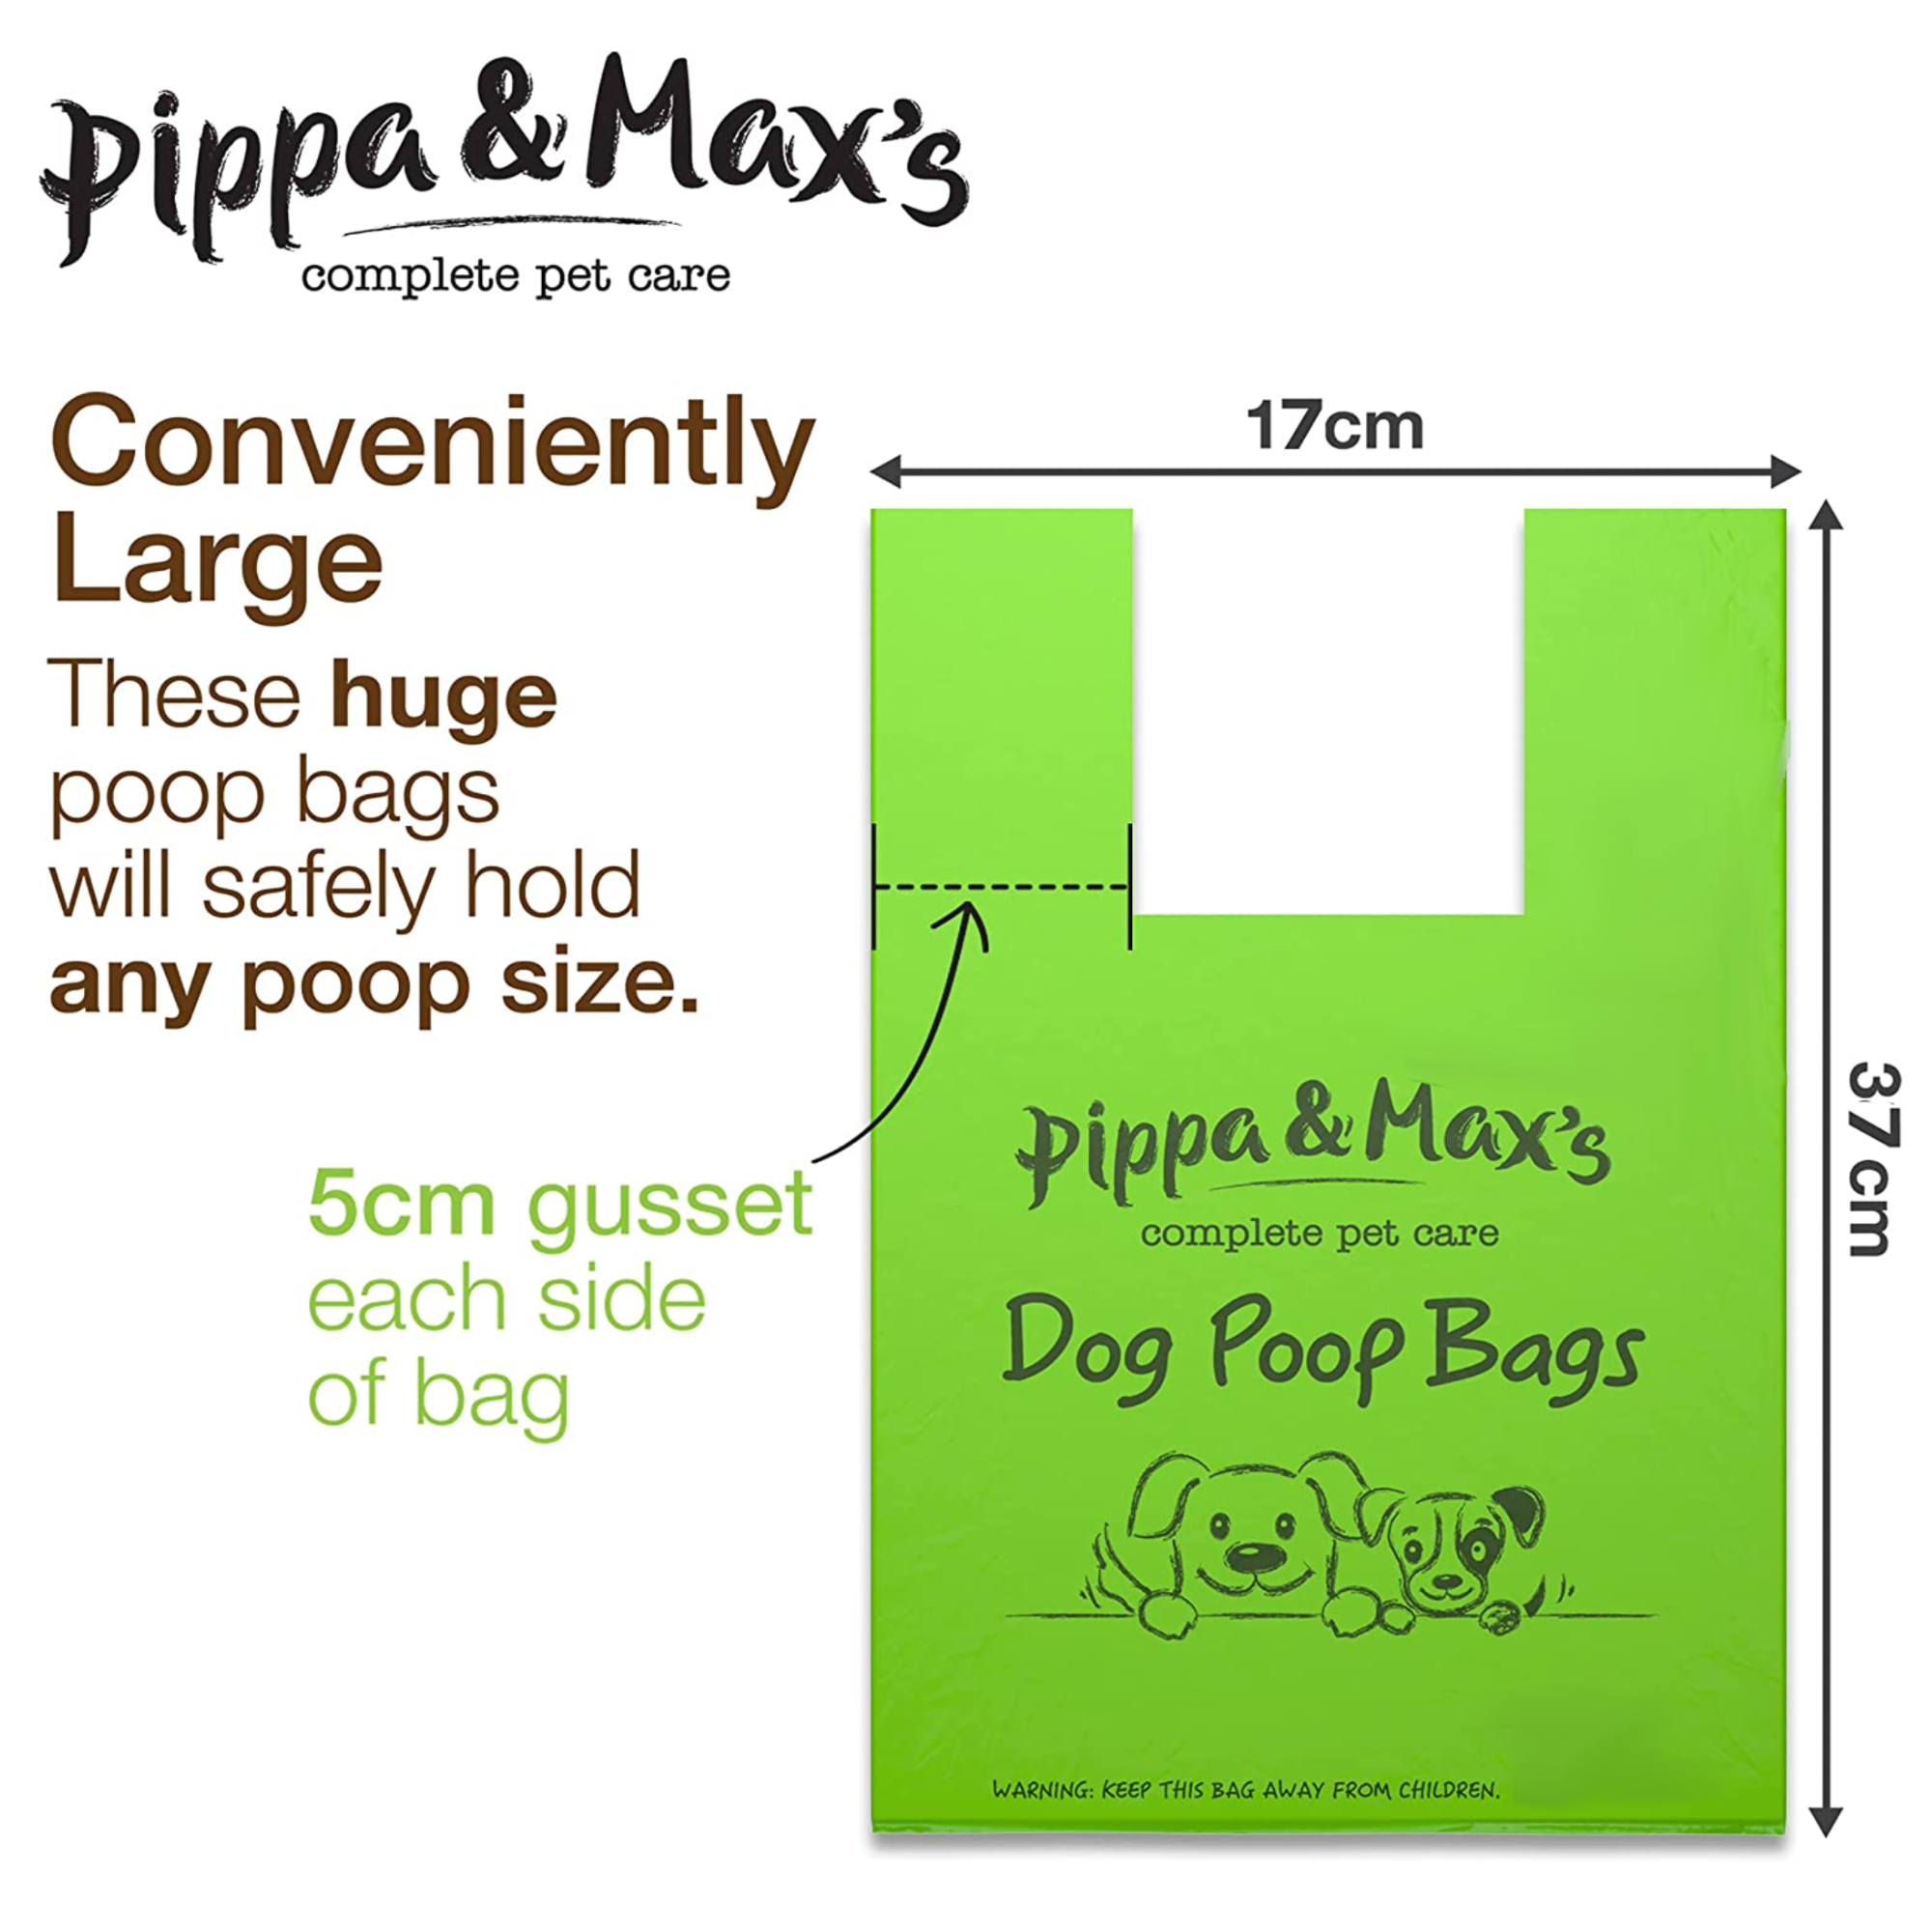 Pippa & Max Select Dog Poo Bags (500) | Strong and Convenient Poop Bag Selection | Biodegradable Box Included